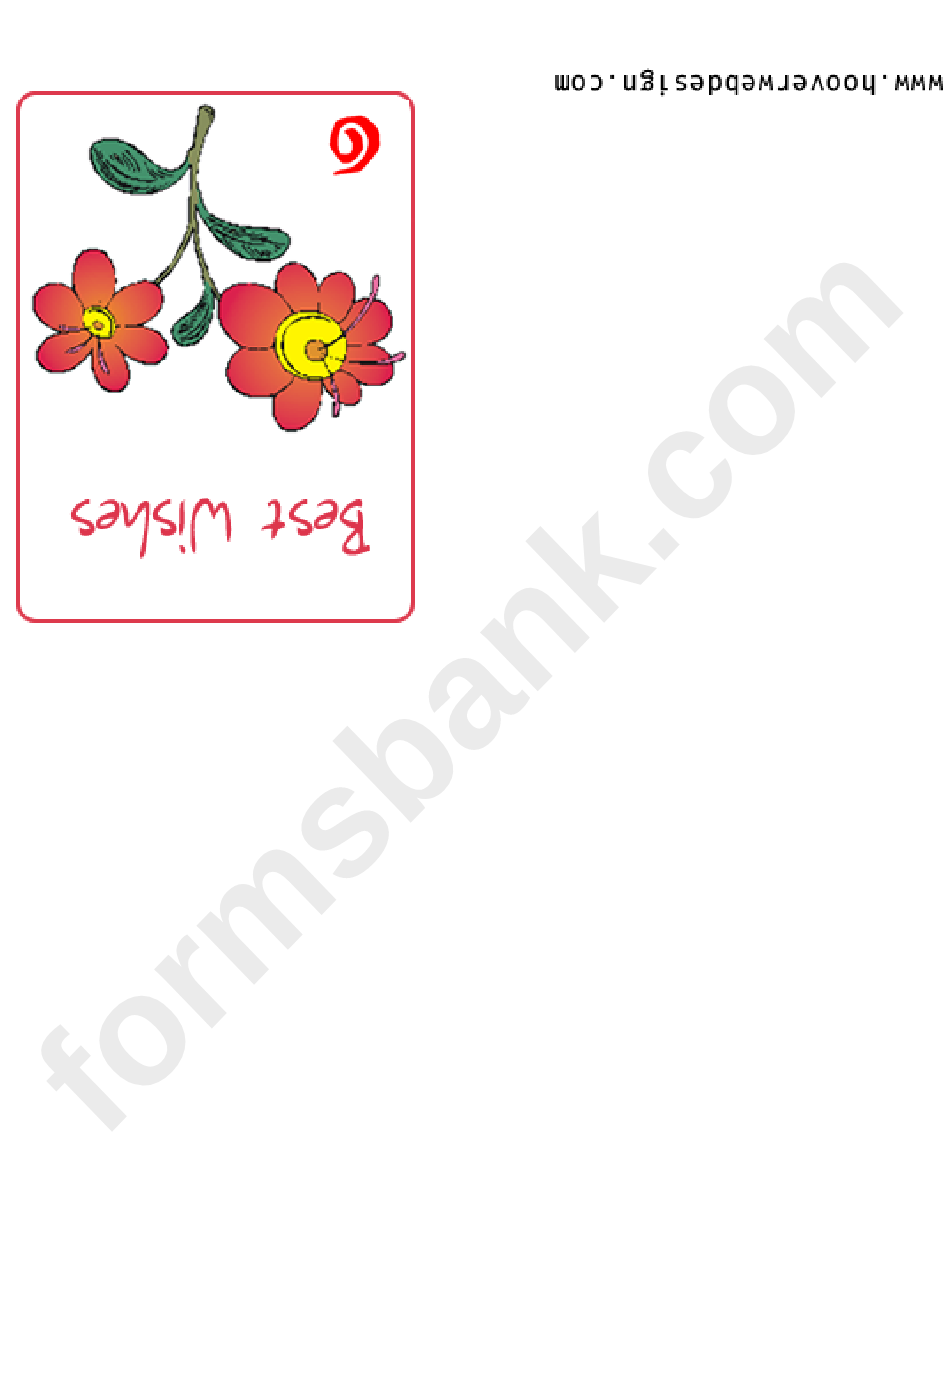 Best Wishes Greeting Card Template